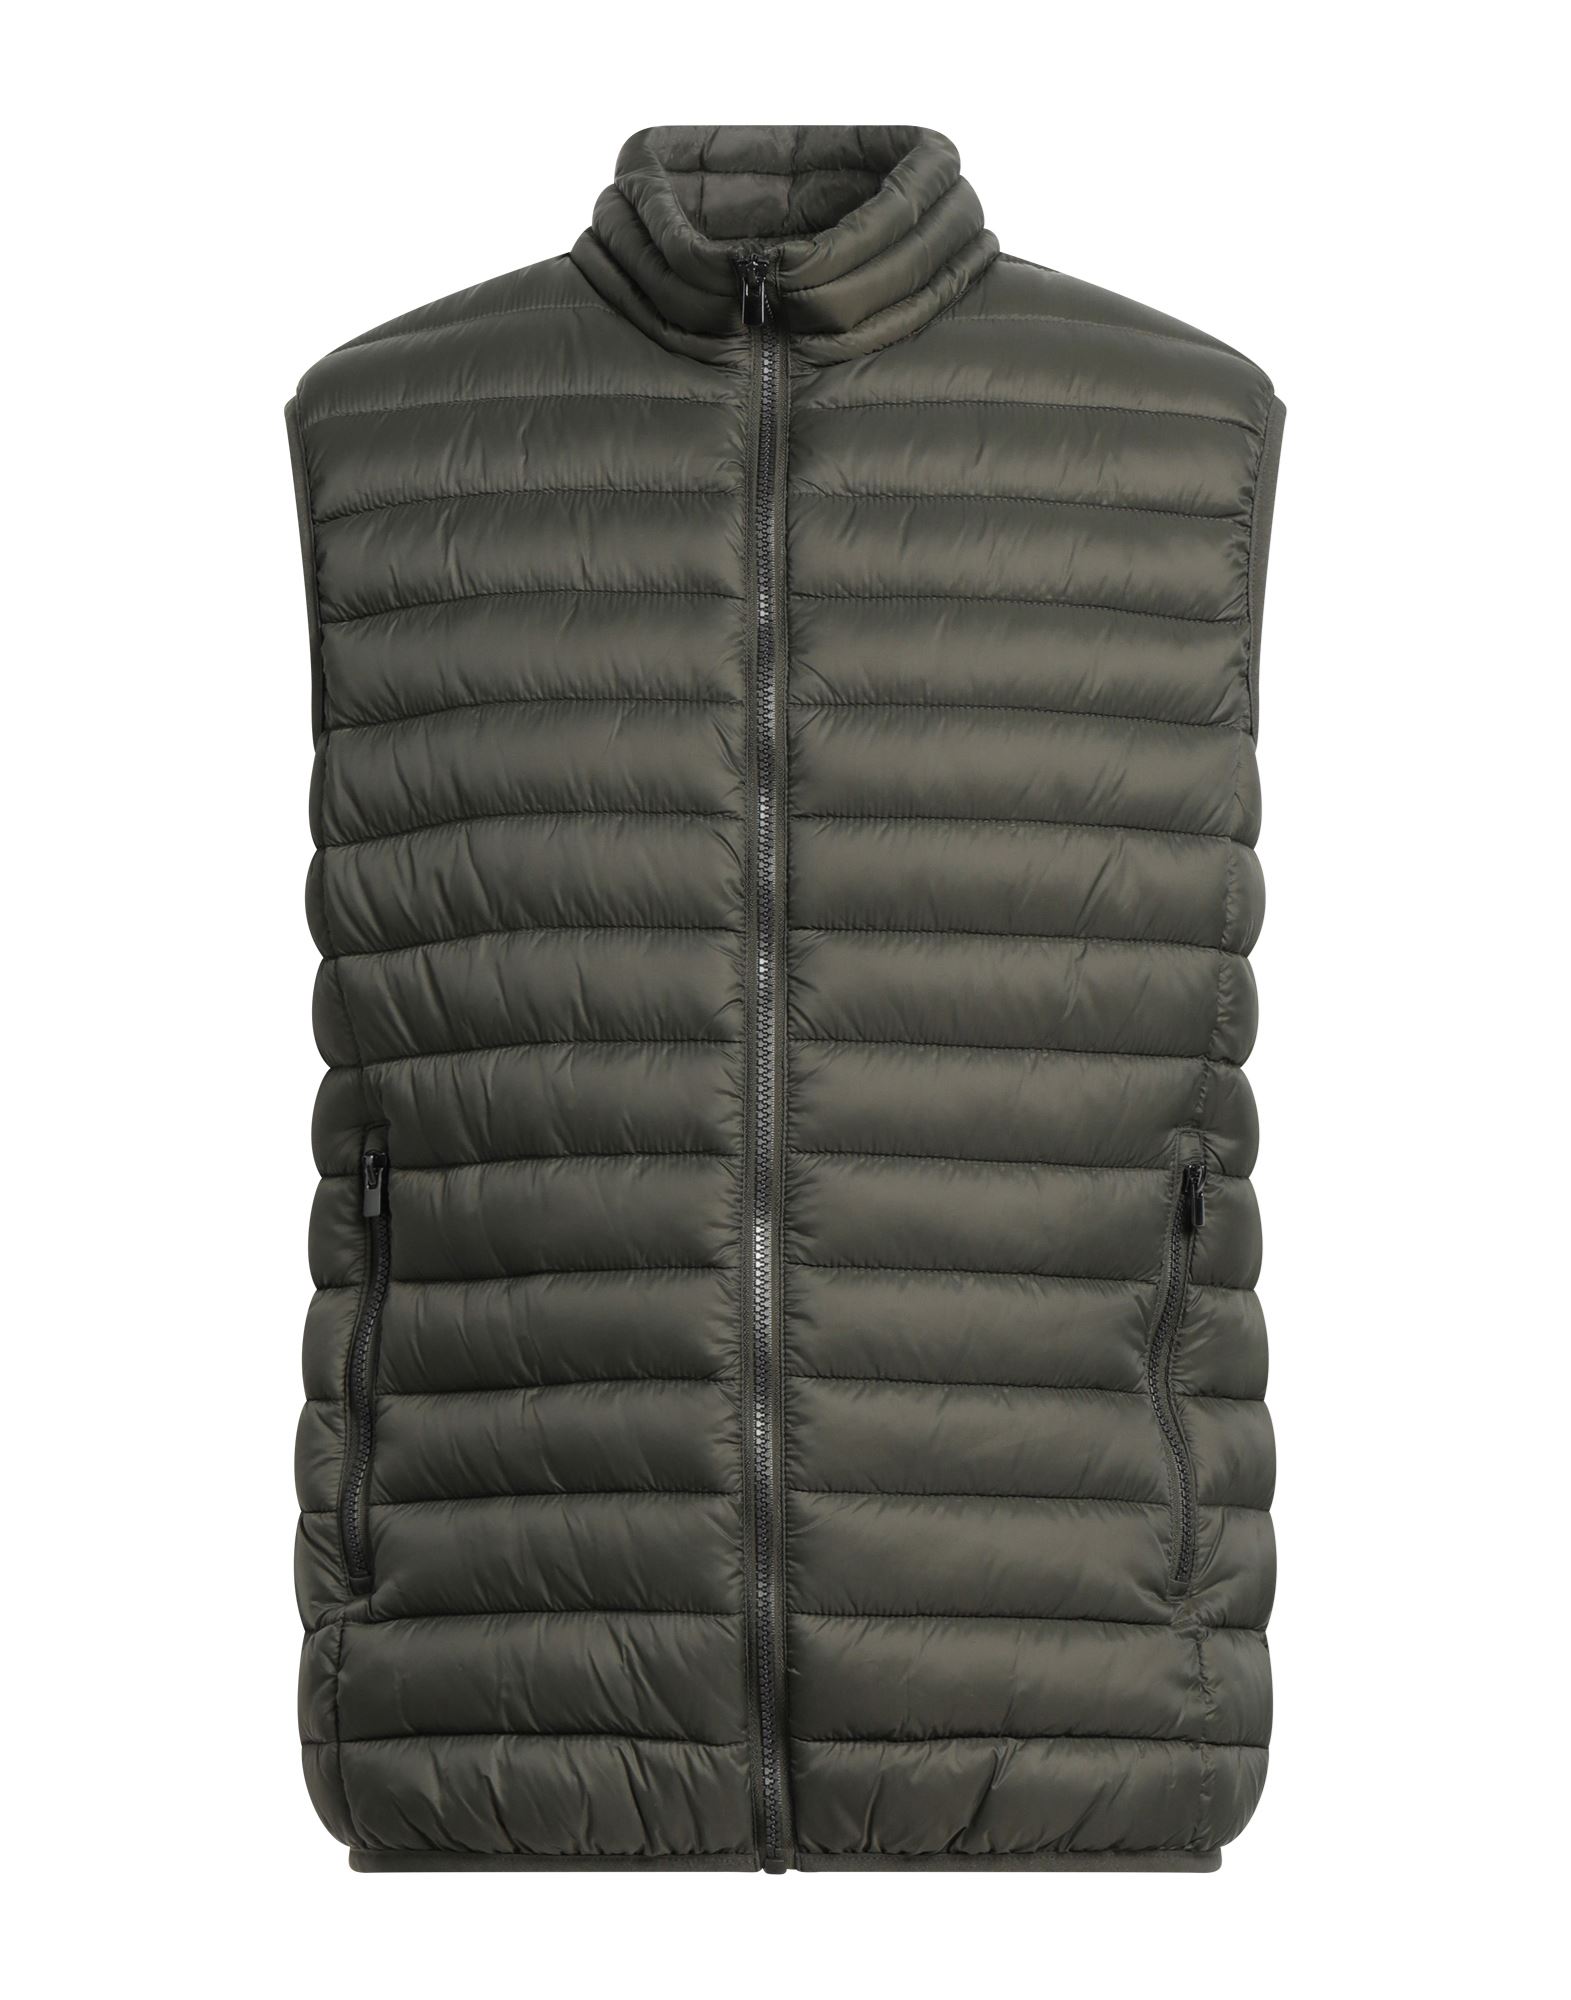 Adhoc Down Jackets In Military Green